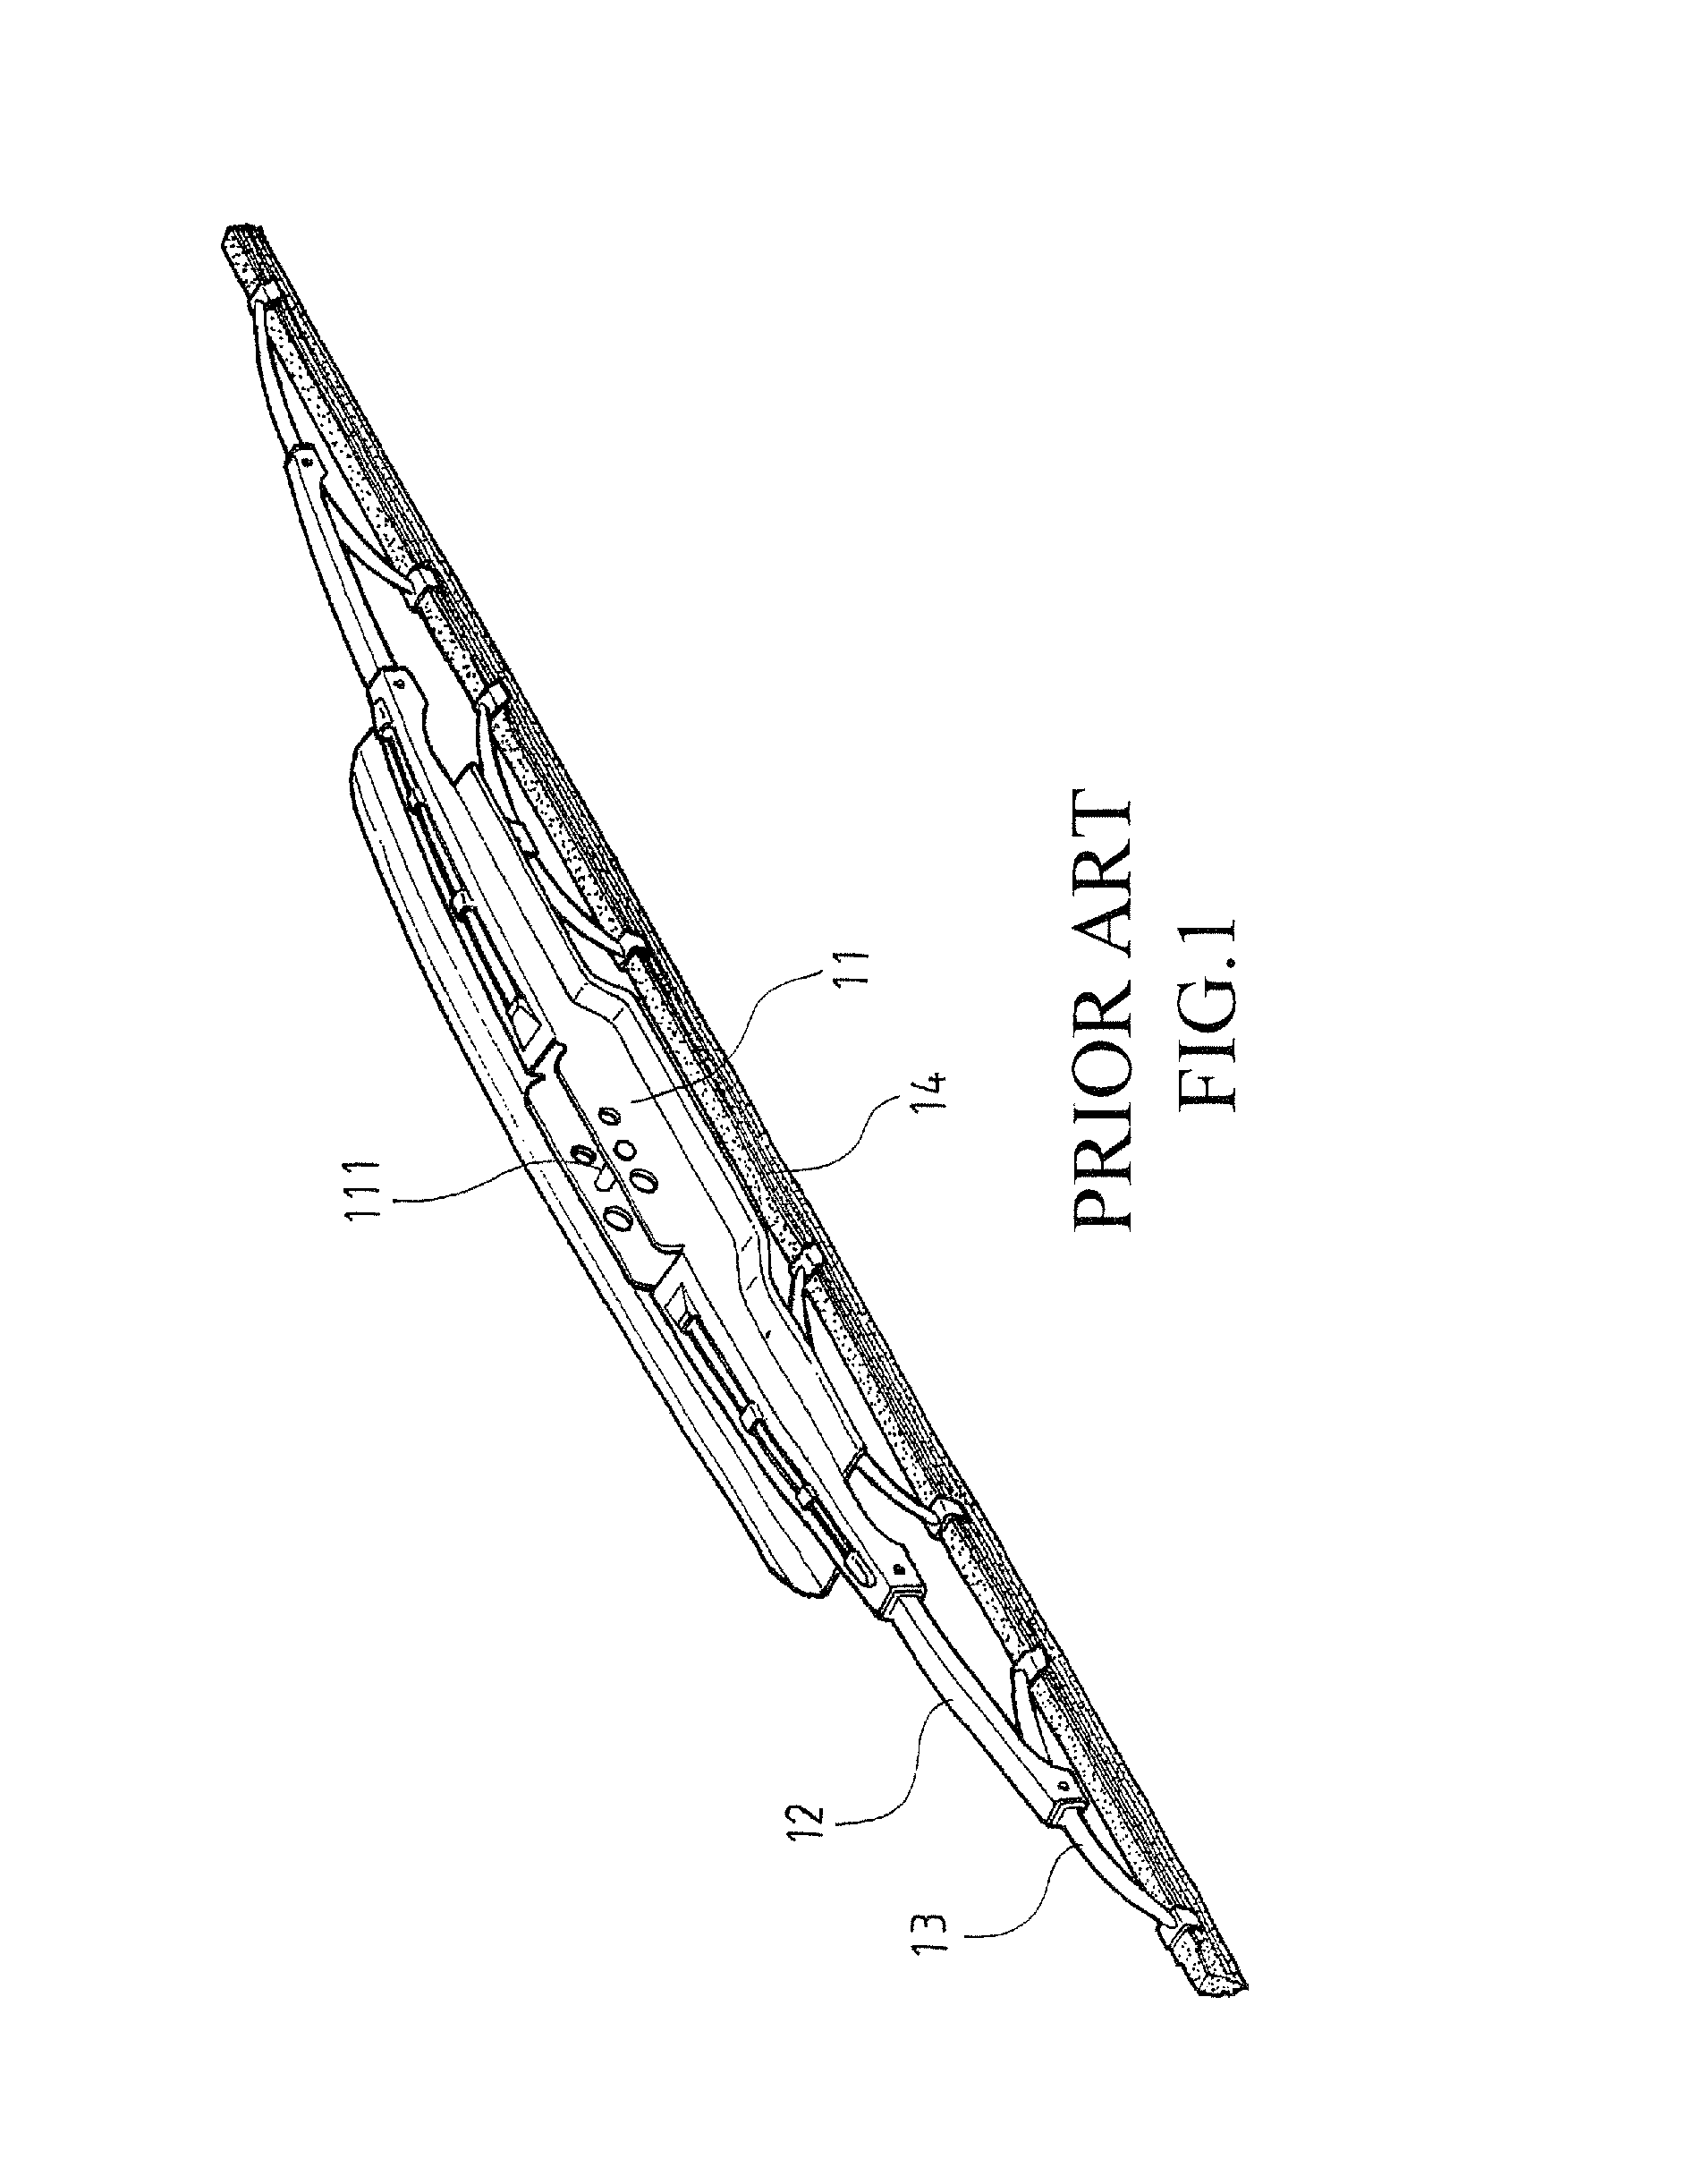 Frame coupling structure of windshield wiper